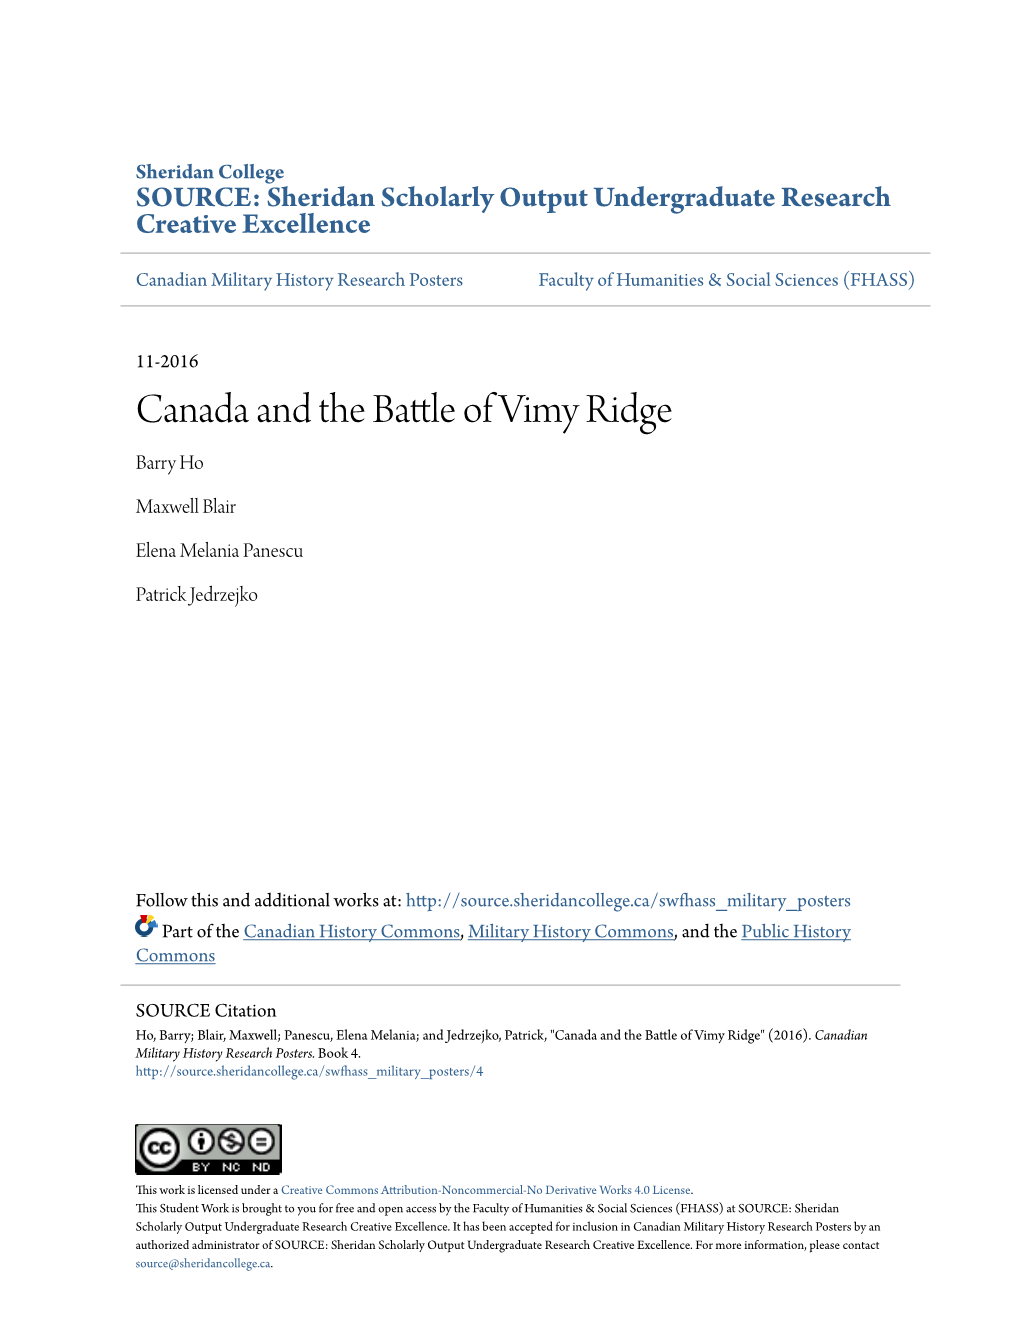 Canada and the Battle of Vimy Ridge